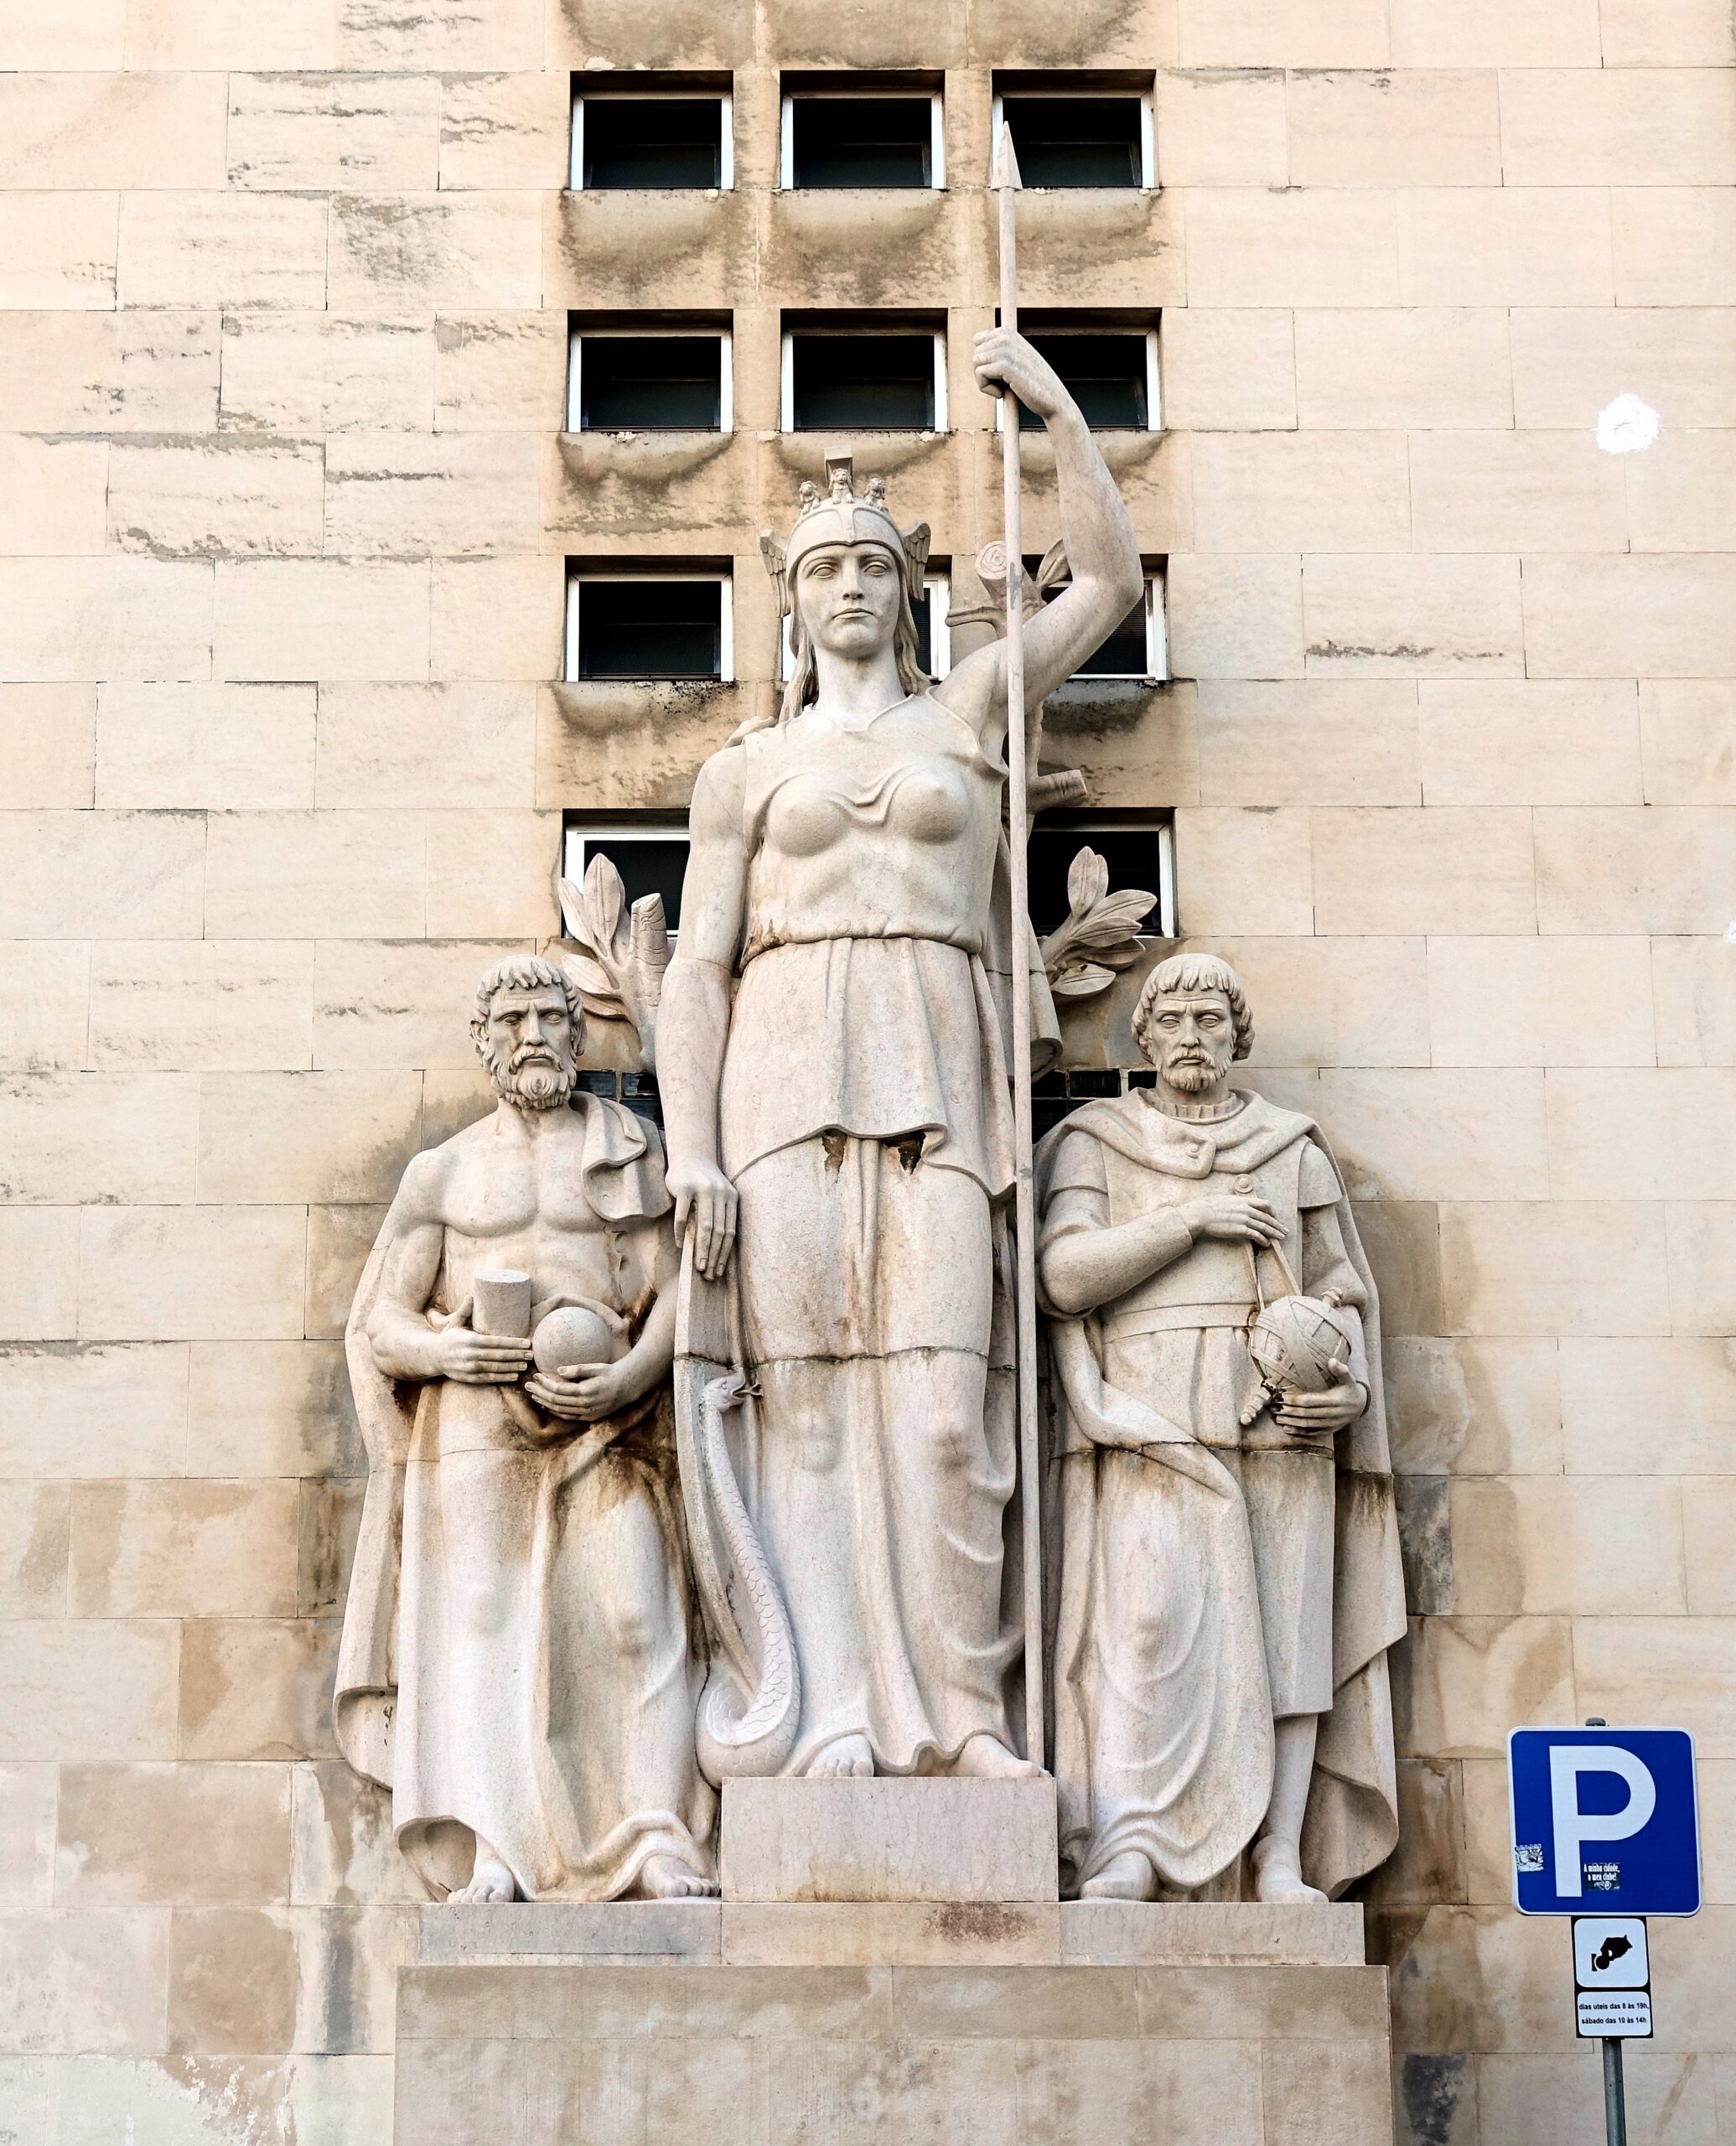 Photo of science heroes statue in Coimbra, Portugal.